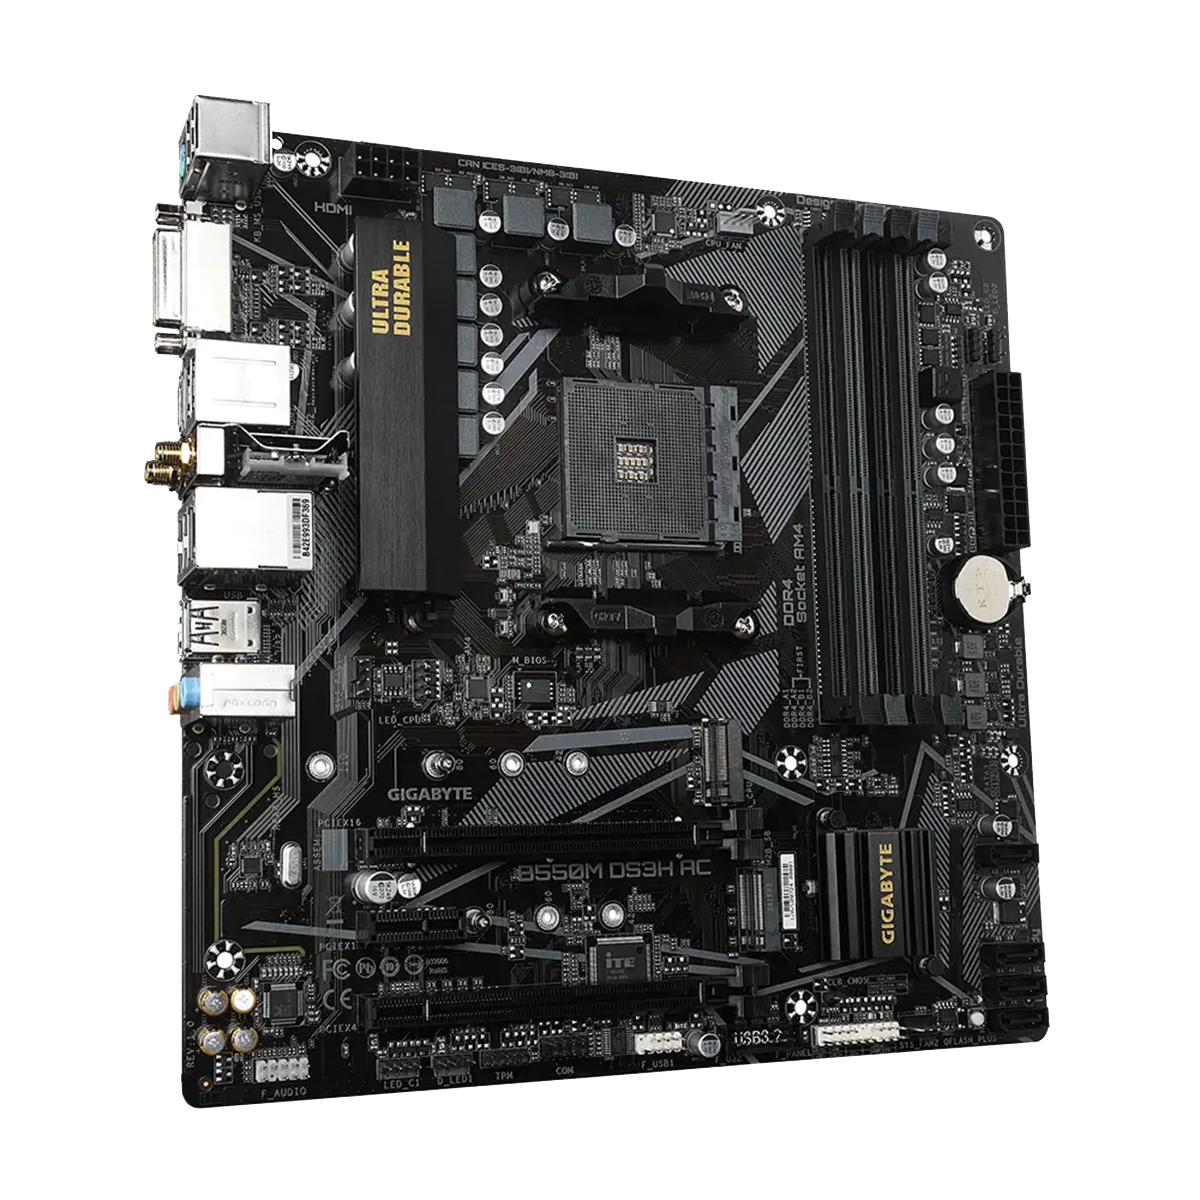 Gigabyte B550M DS3H AC motherboard render at an angle